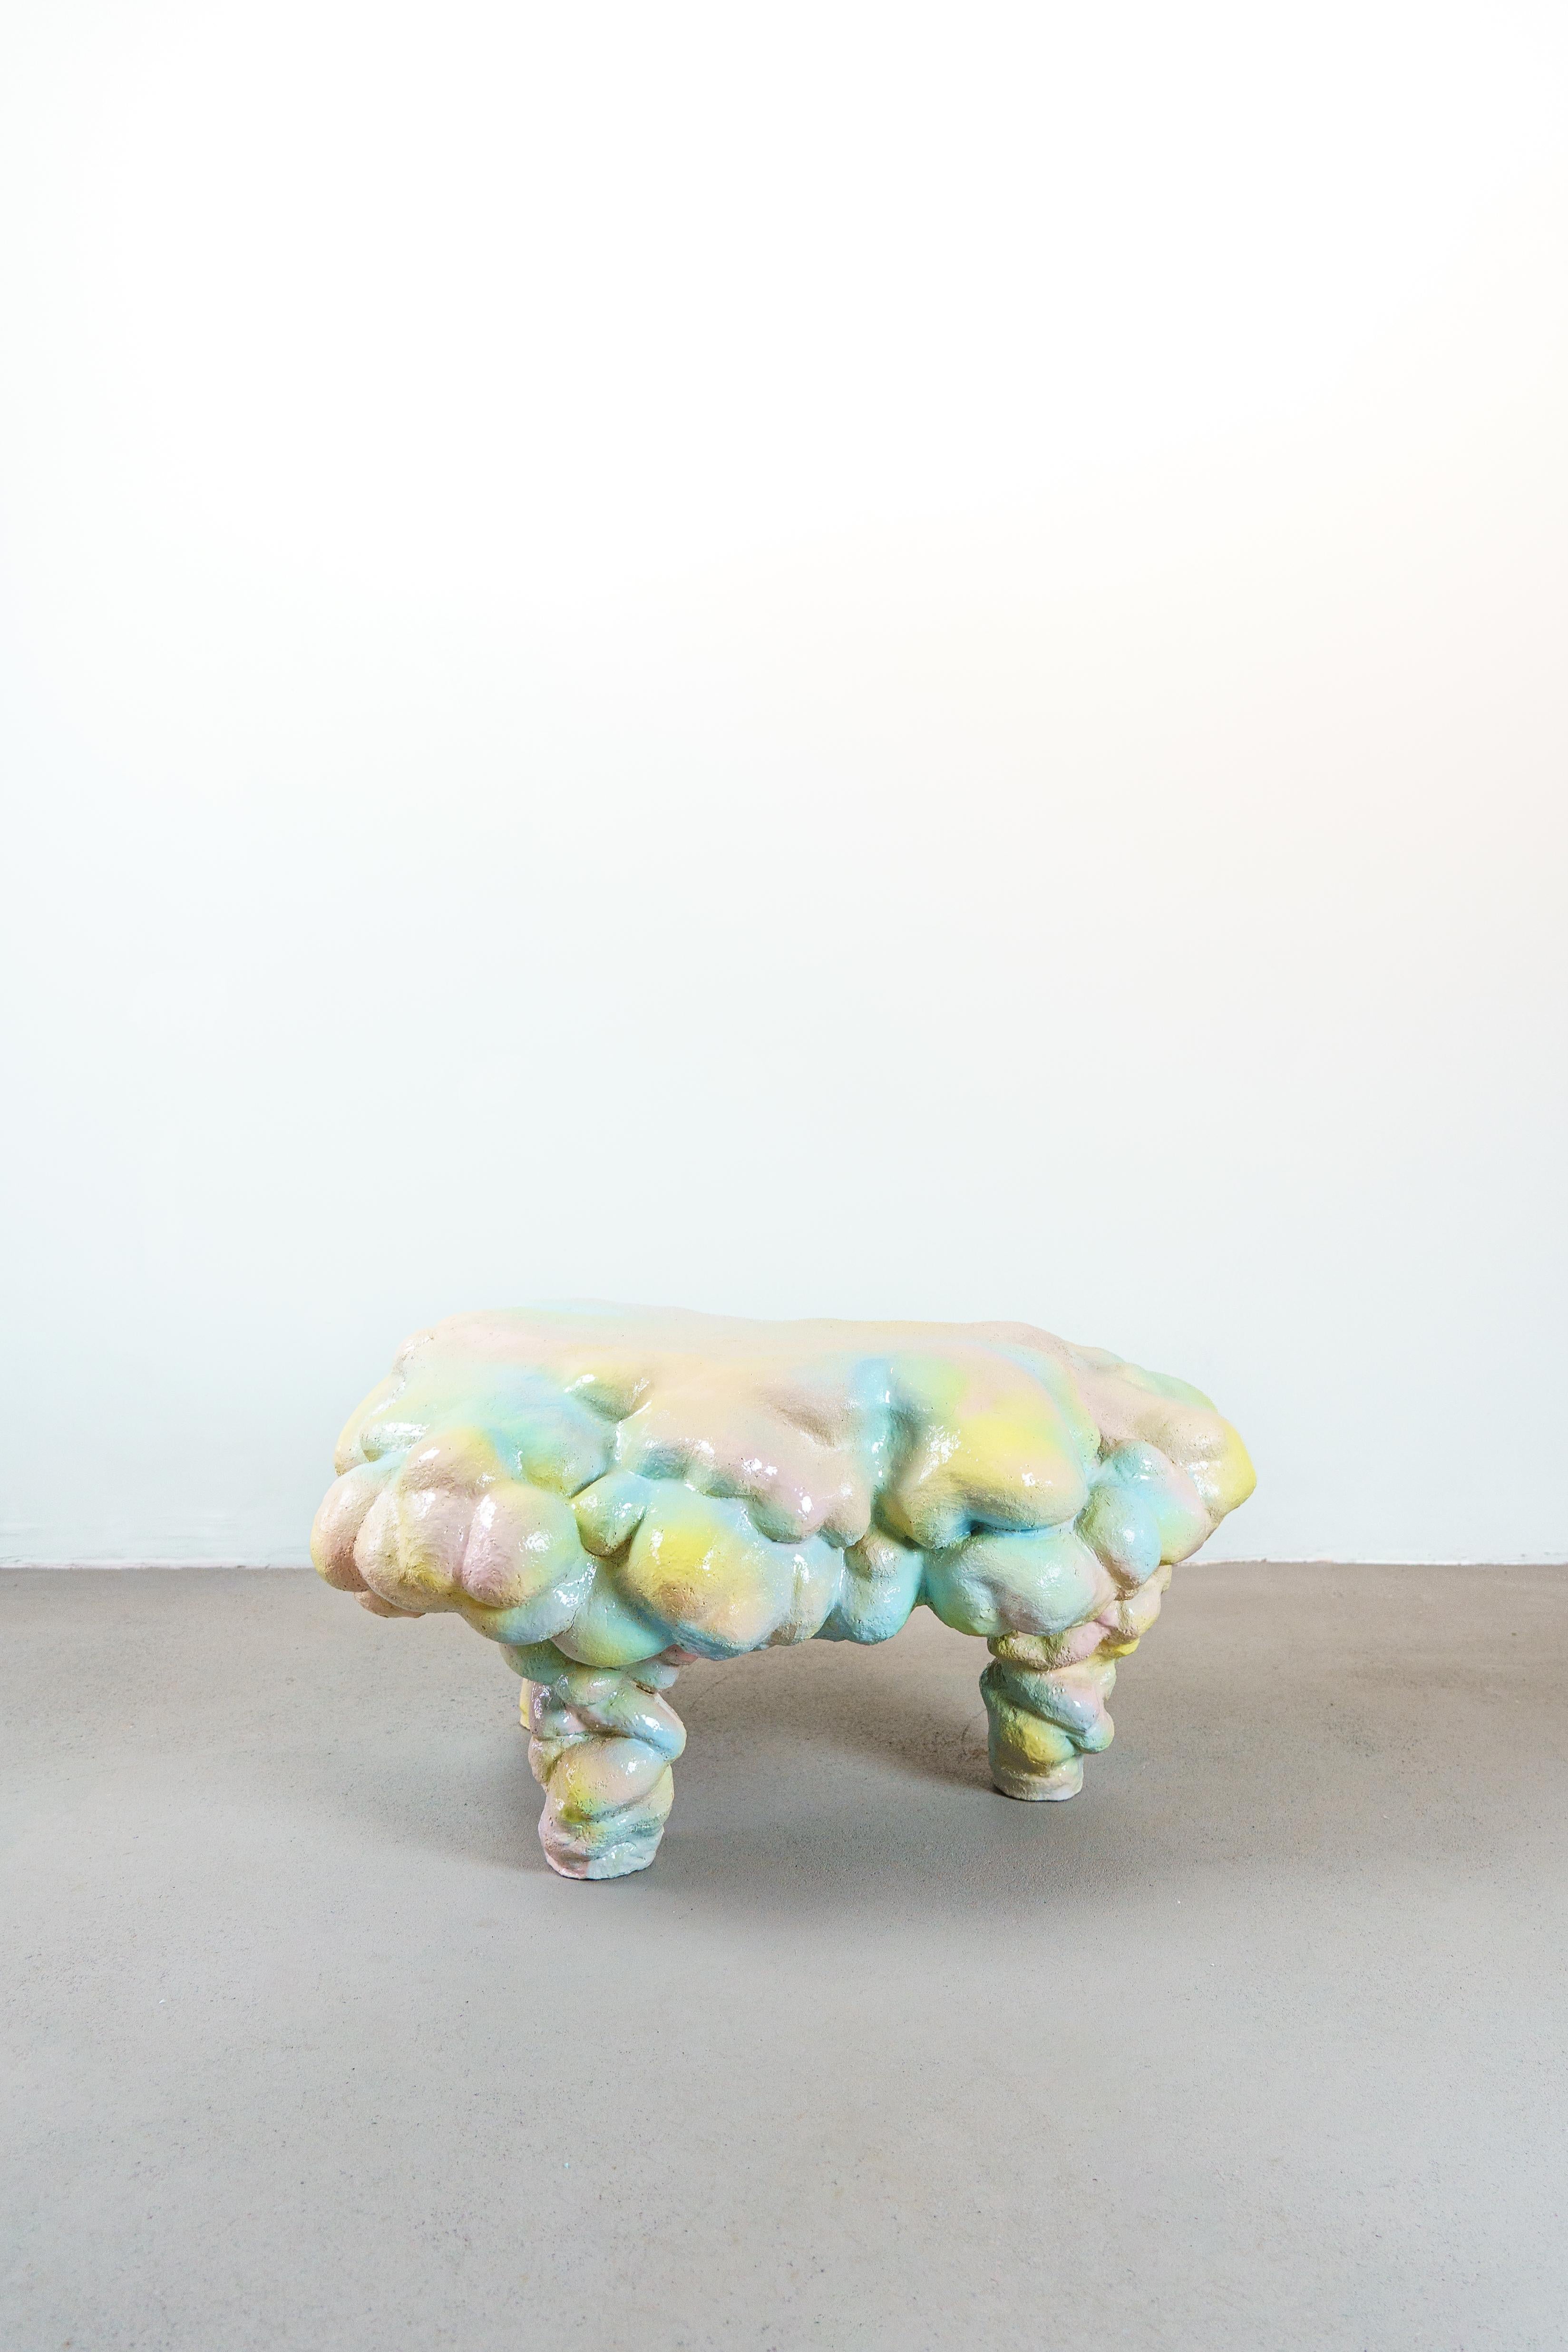 This design sculptural table is part of Body Works, a project by Dutch artist Natasja Alers. The artist assembles parts of the human body and pushes it to new sculptural aesthetics of art and design works made from recycled clay.

The hand sculpted